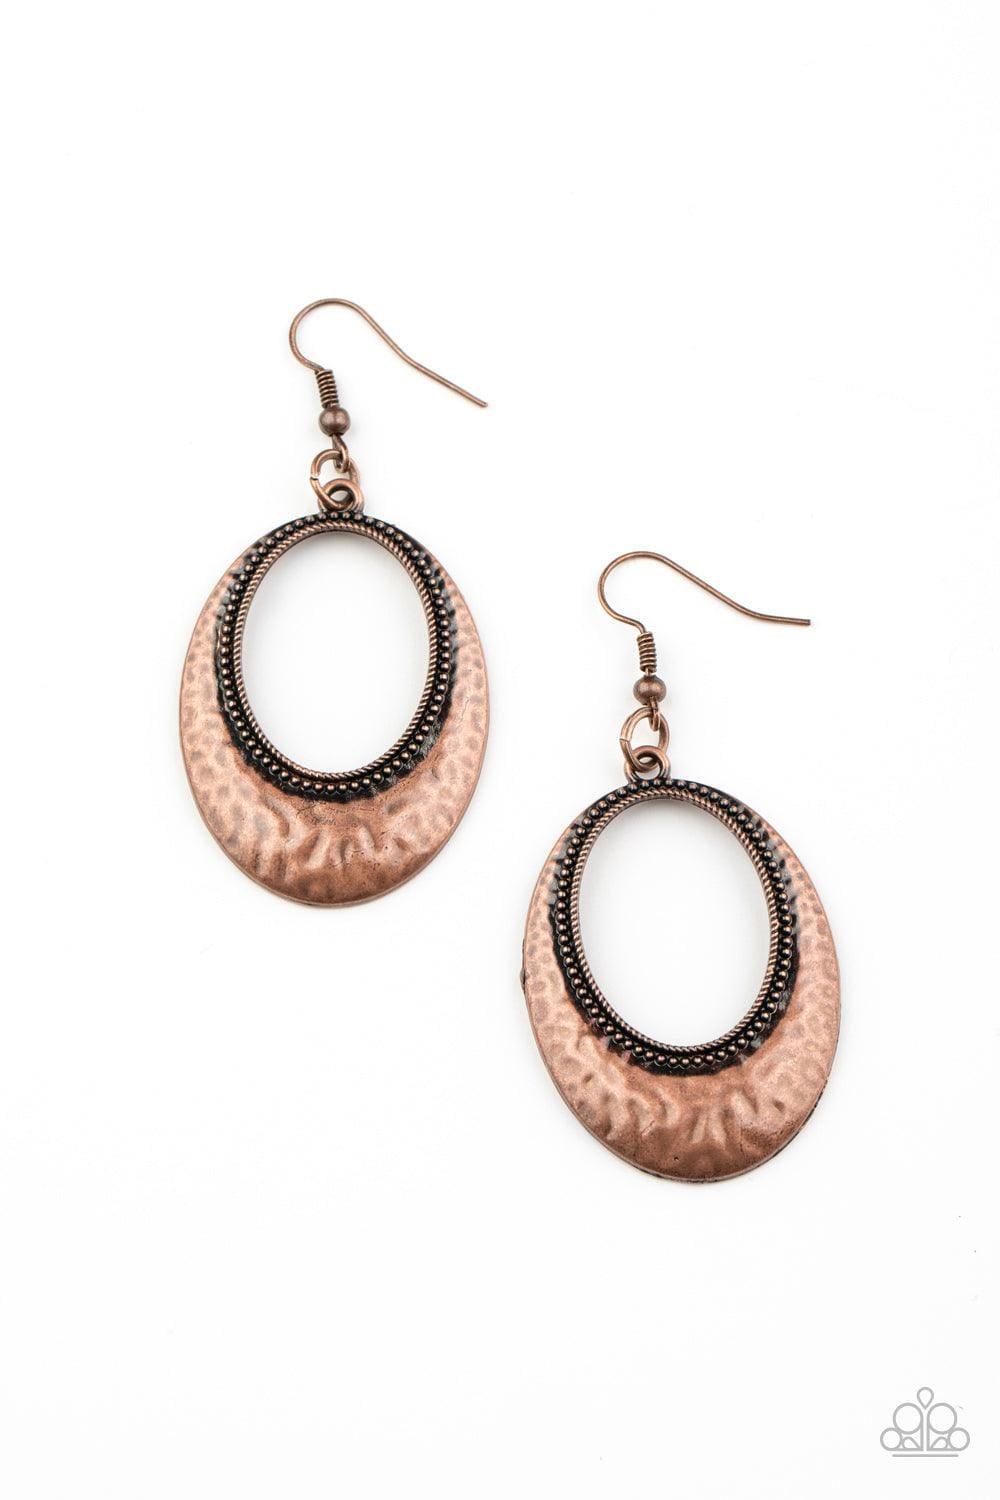 Paparazzi Accessories - Tempest Texture - Copper Earrings - Bling by JessieK